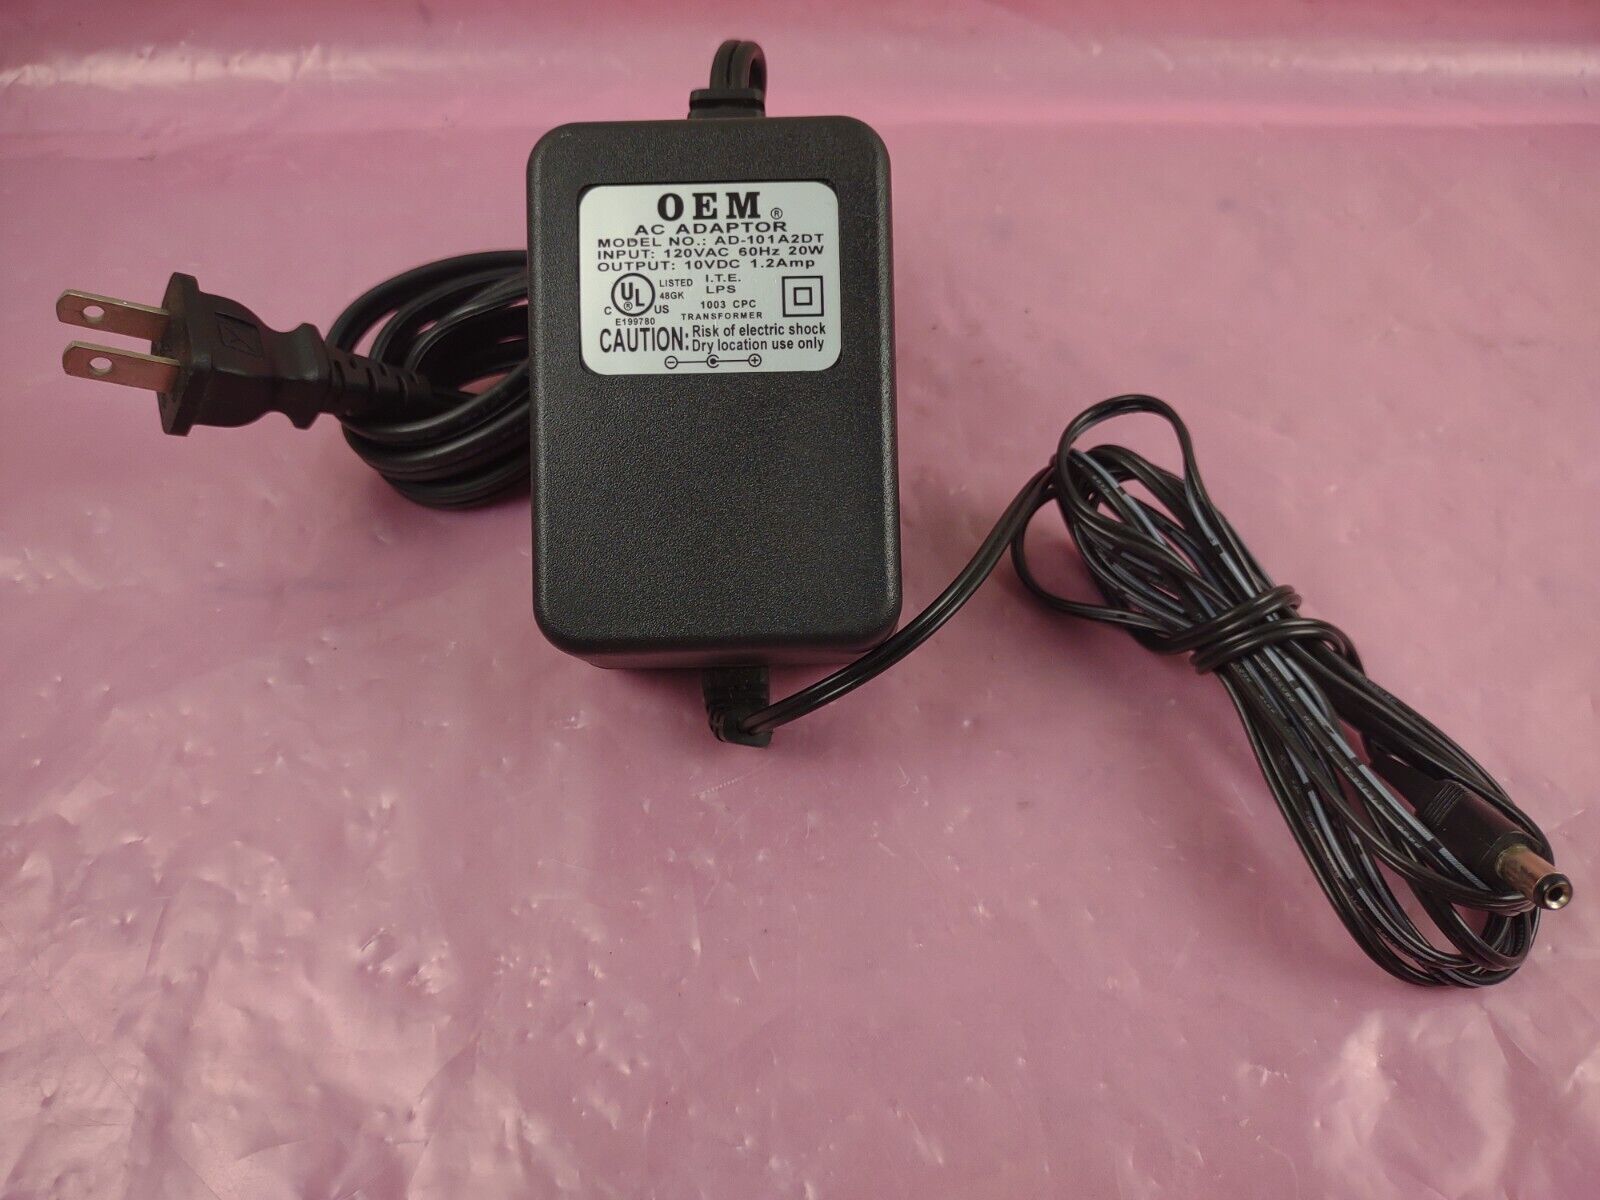 AD-101A2DT AC Adaptor Output 10V DC 1.2Amp Power Supply Transformer Type: Transformer Features: Powered MPN: AD-1